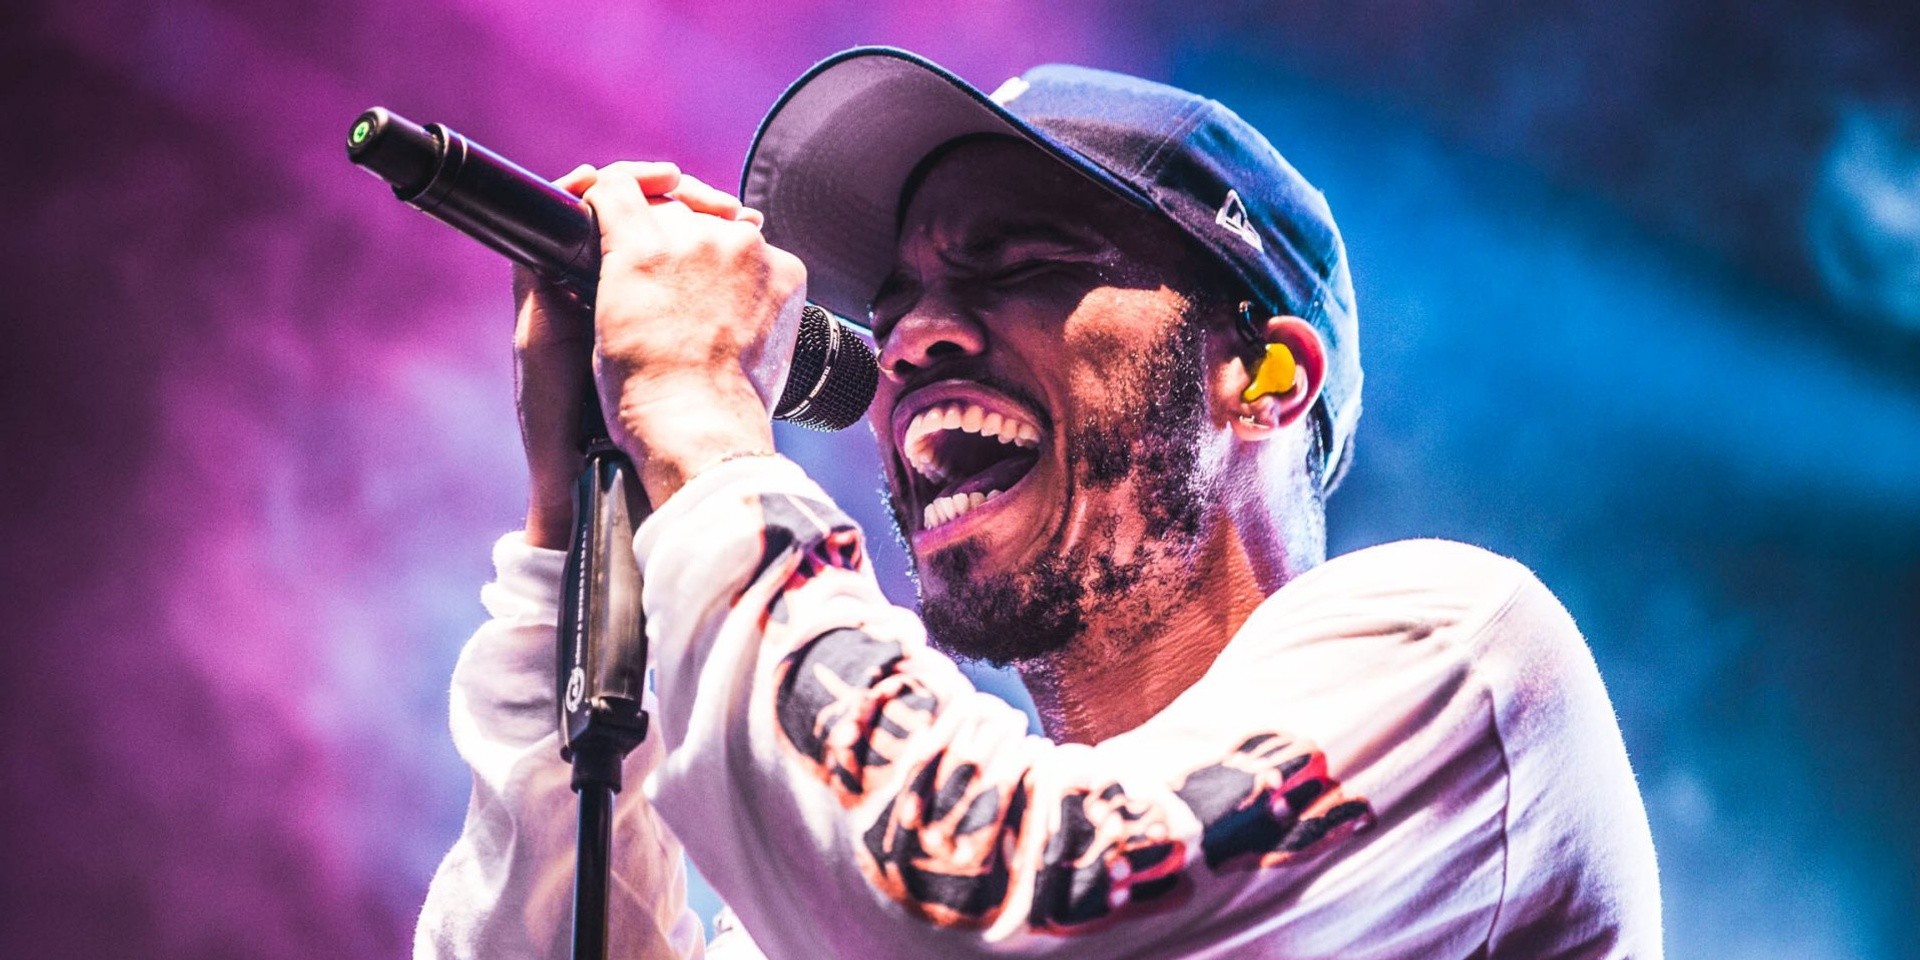 Anderson .Paak releases new album Ventura , featuring André 3000, Lalah Hathaway and more – listen